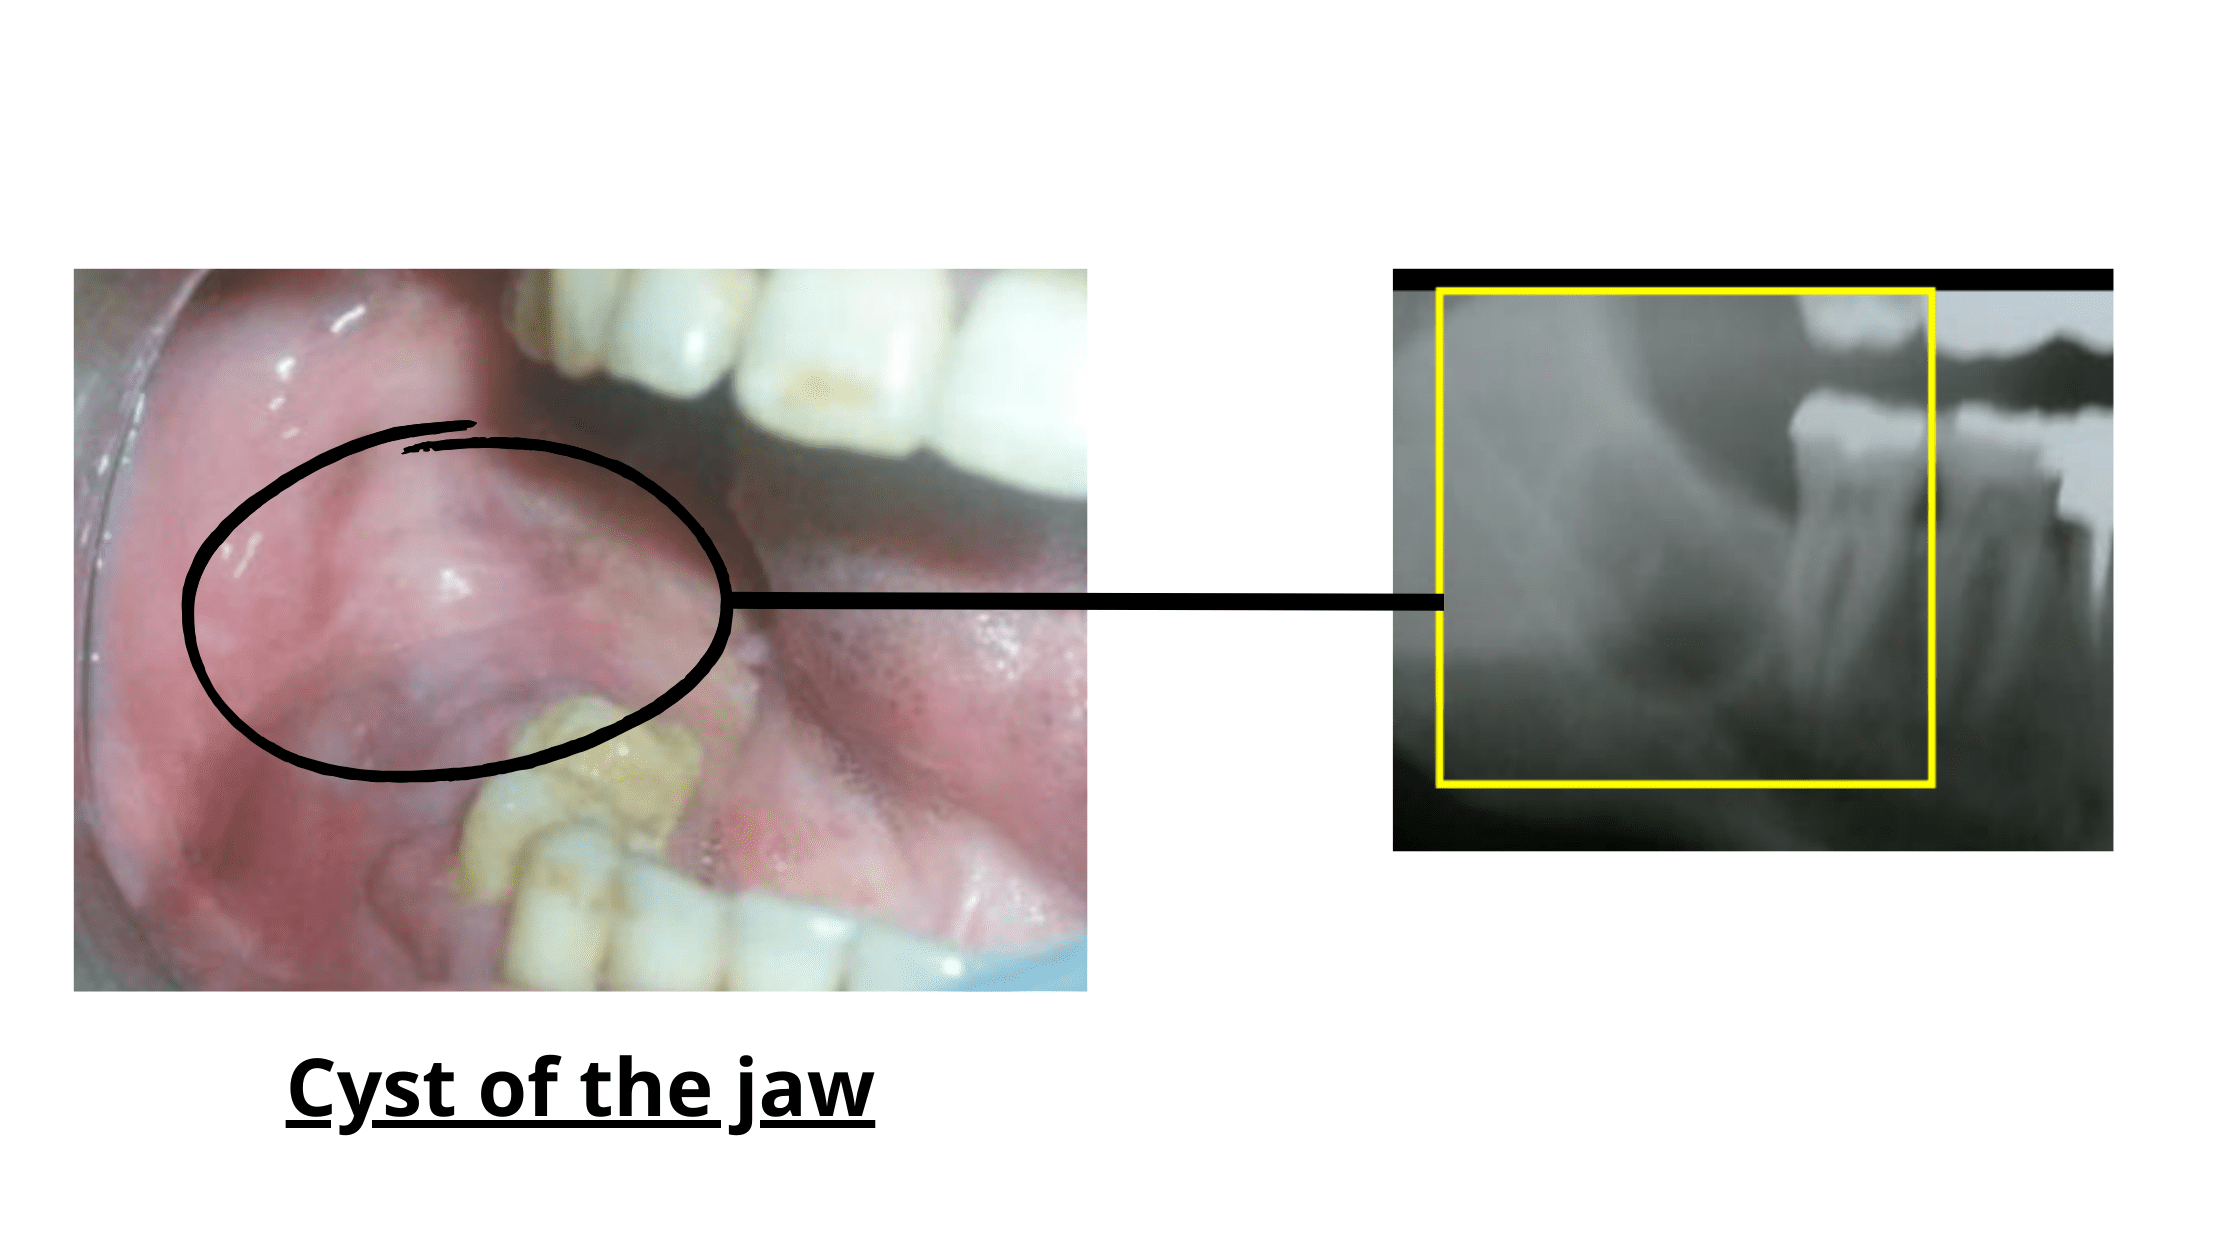 Jaw cyst coming back after tooth extraction